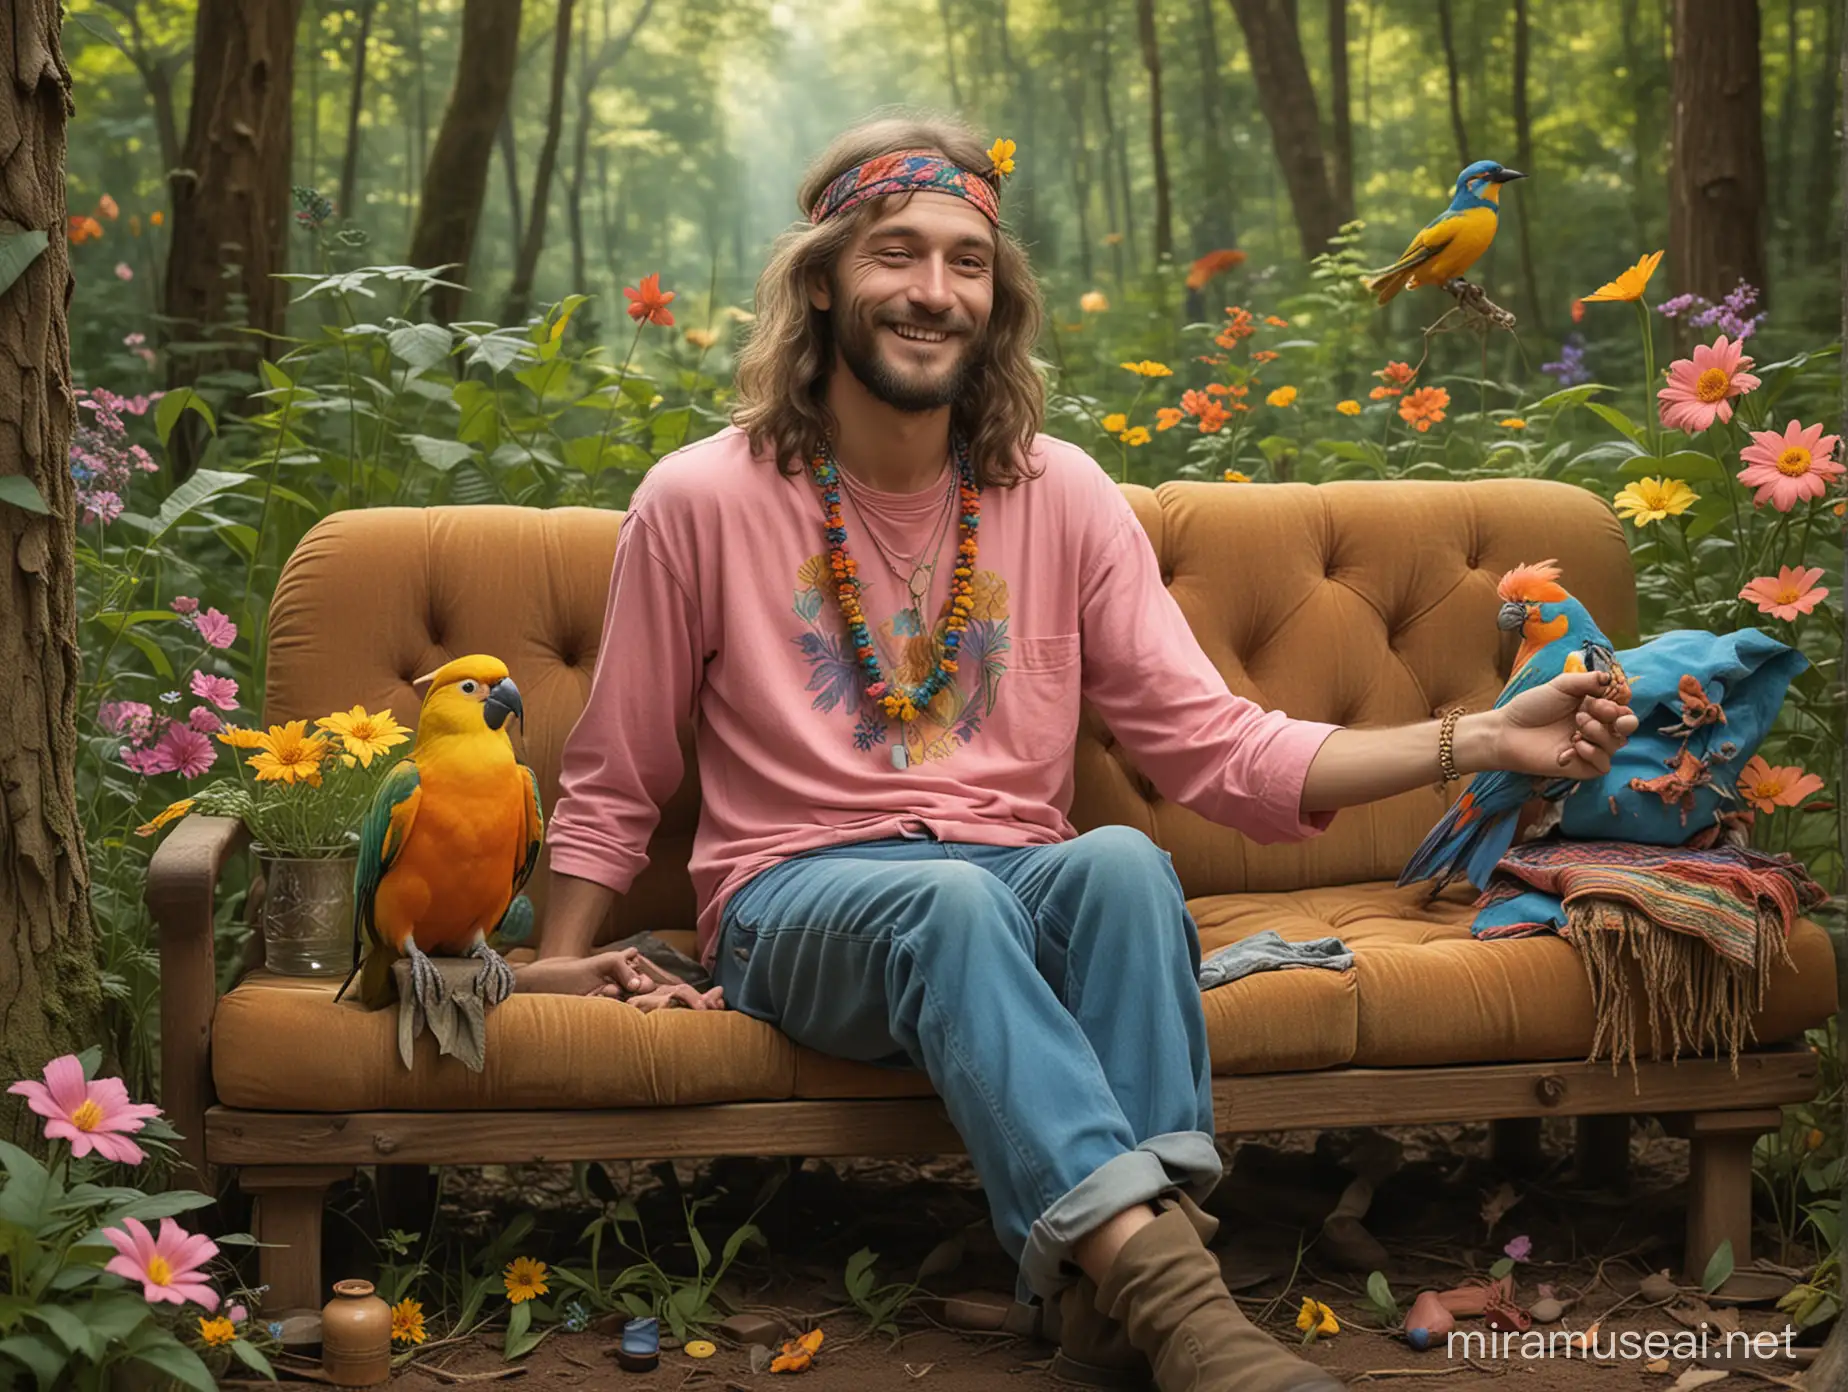 Hippie Man Enjoying Natures Tranquility with Colorful Wildlife and Floral Bliss